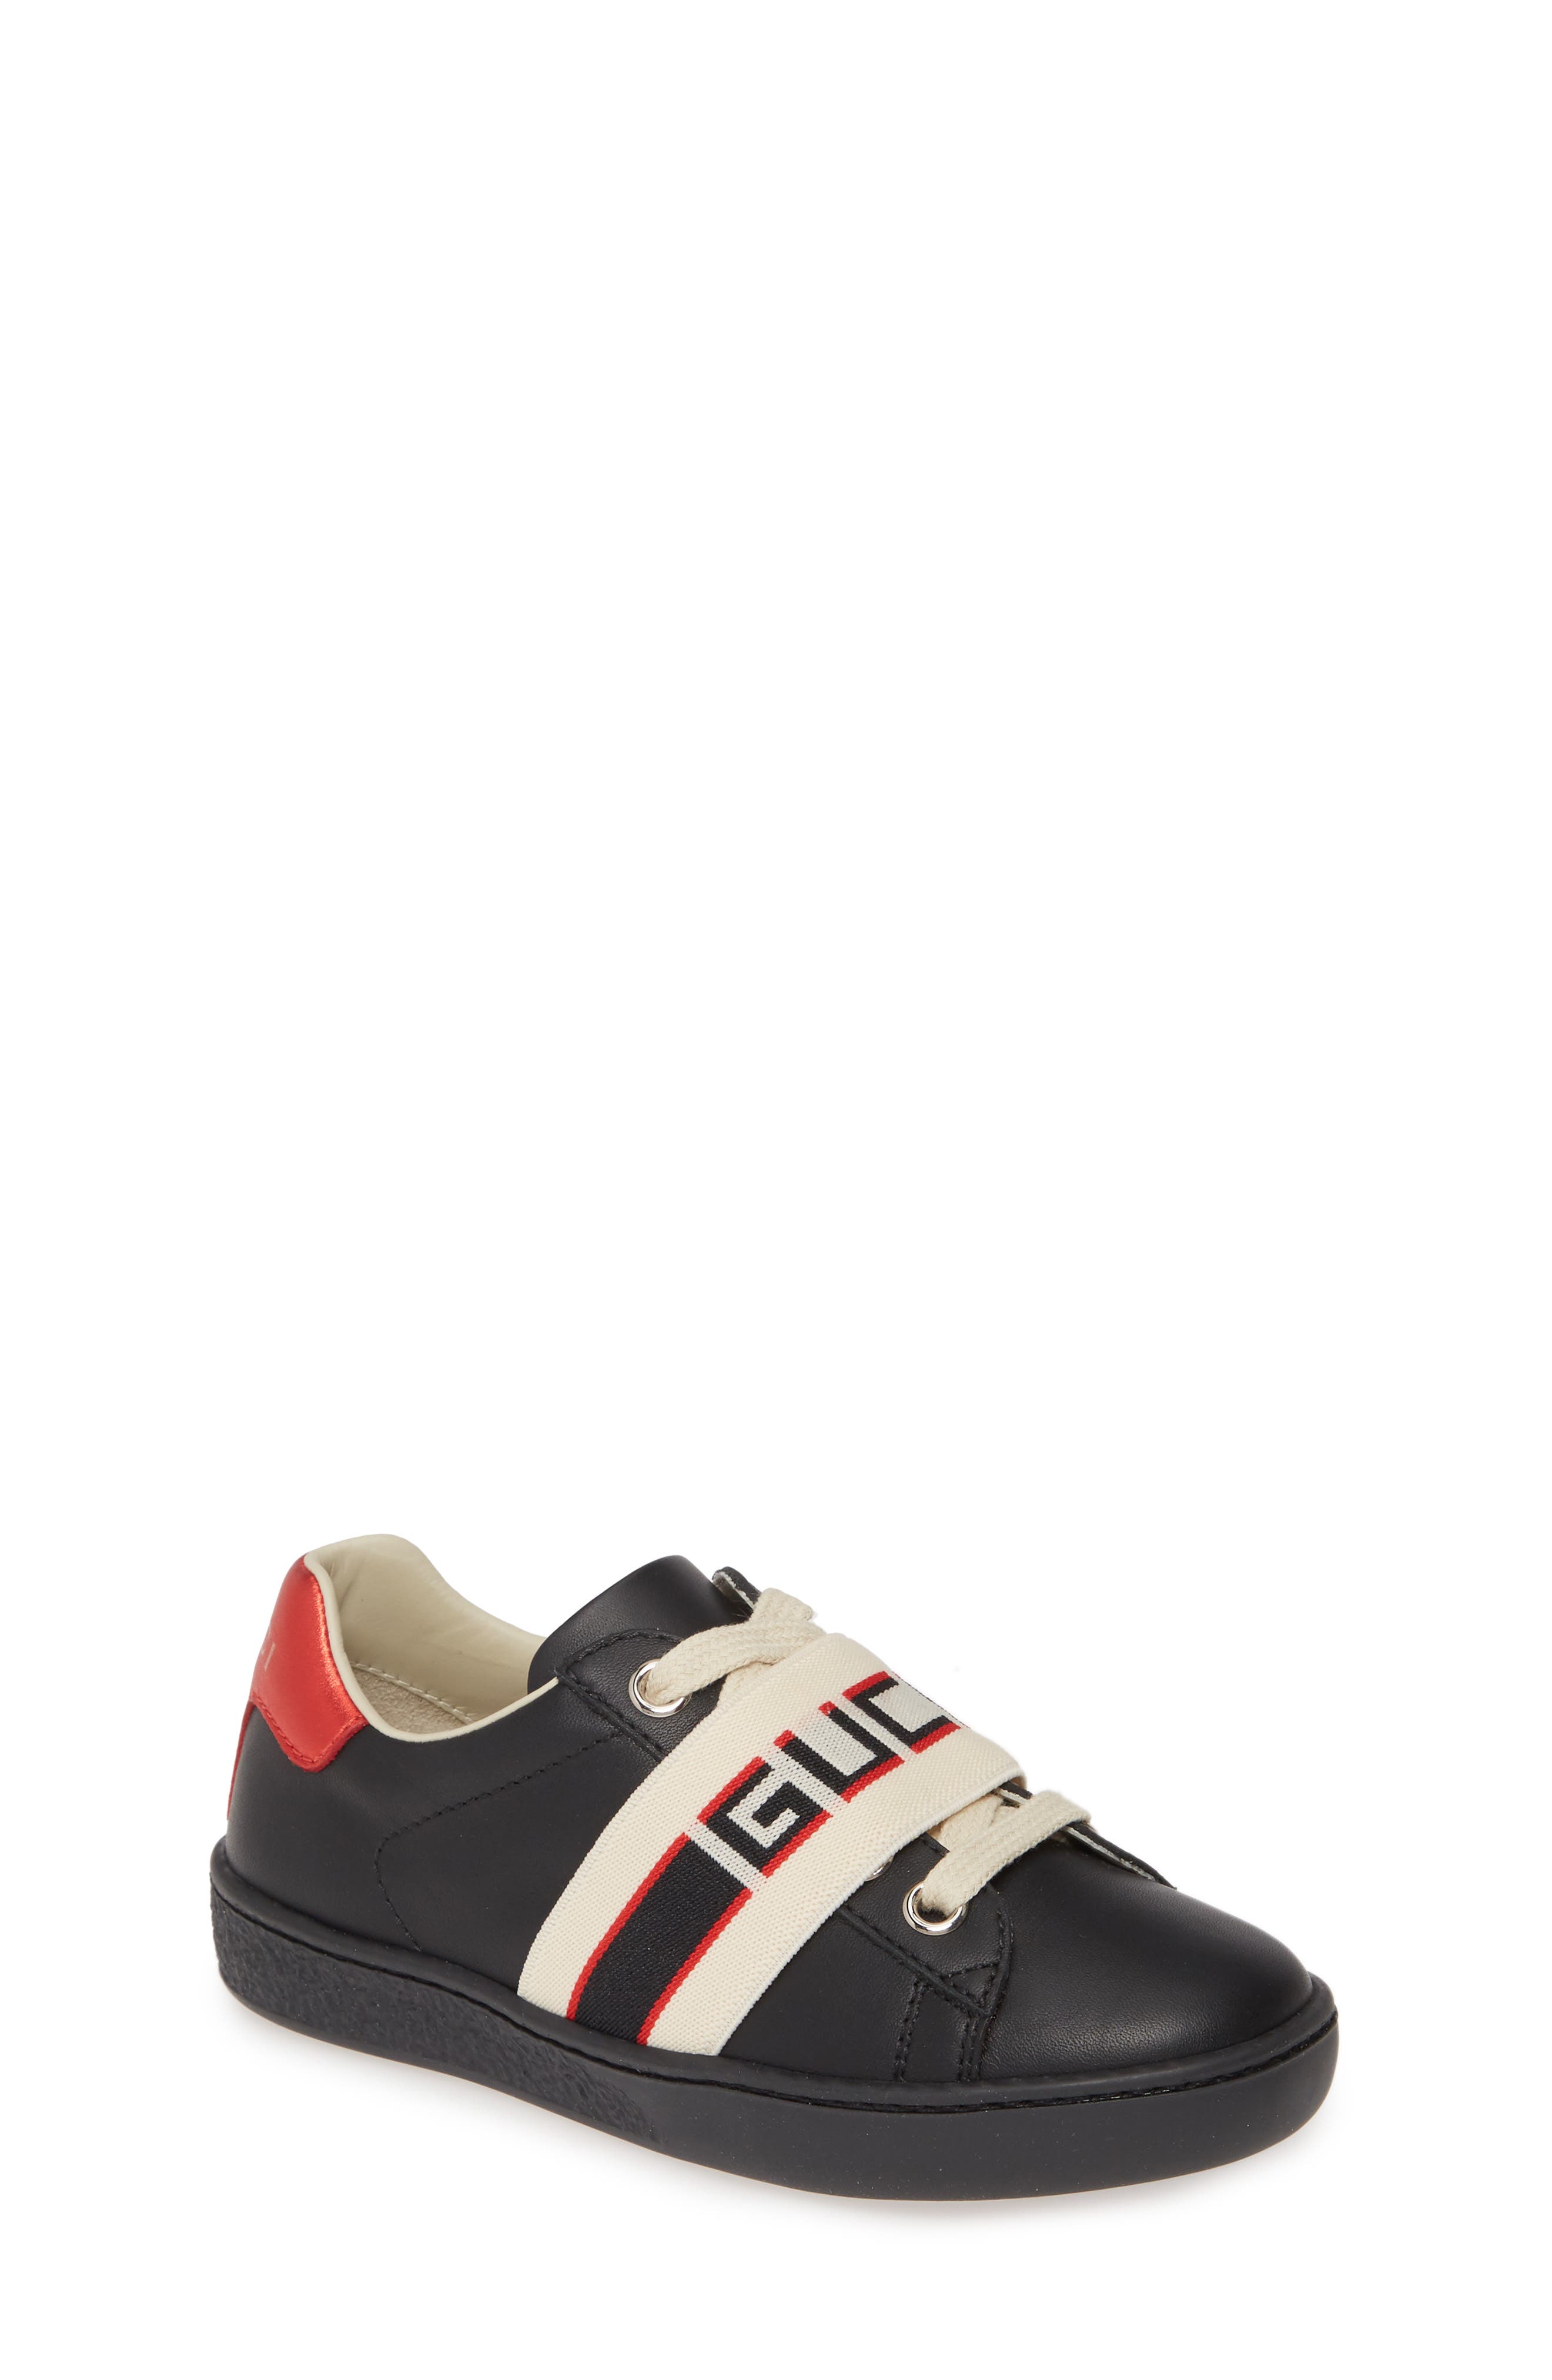 gucci shoes for teens